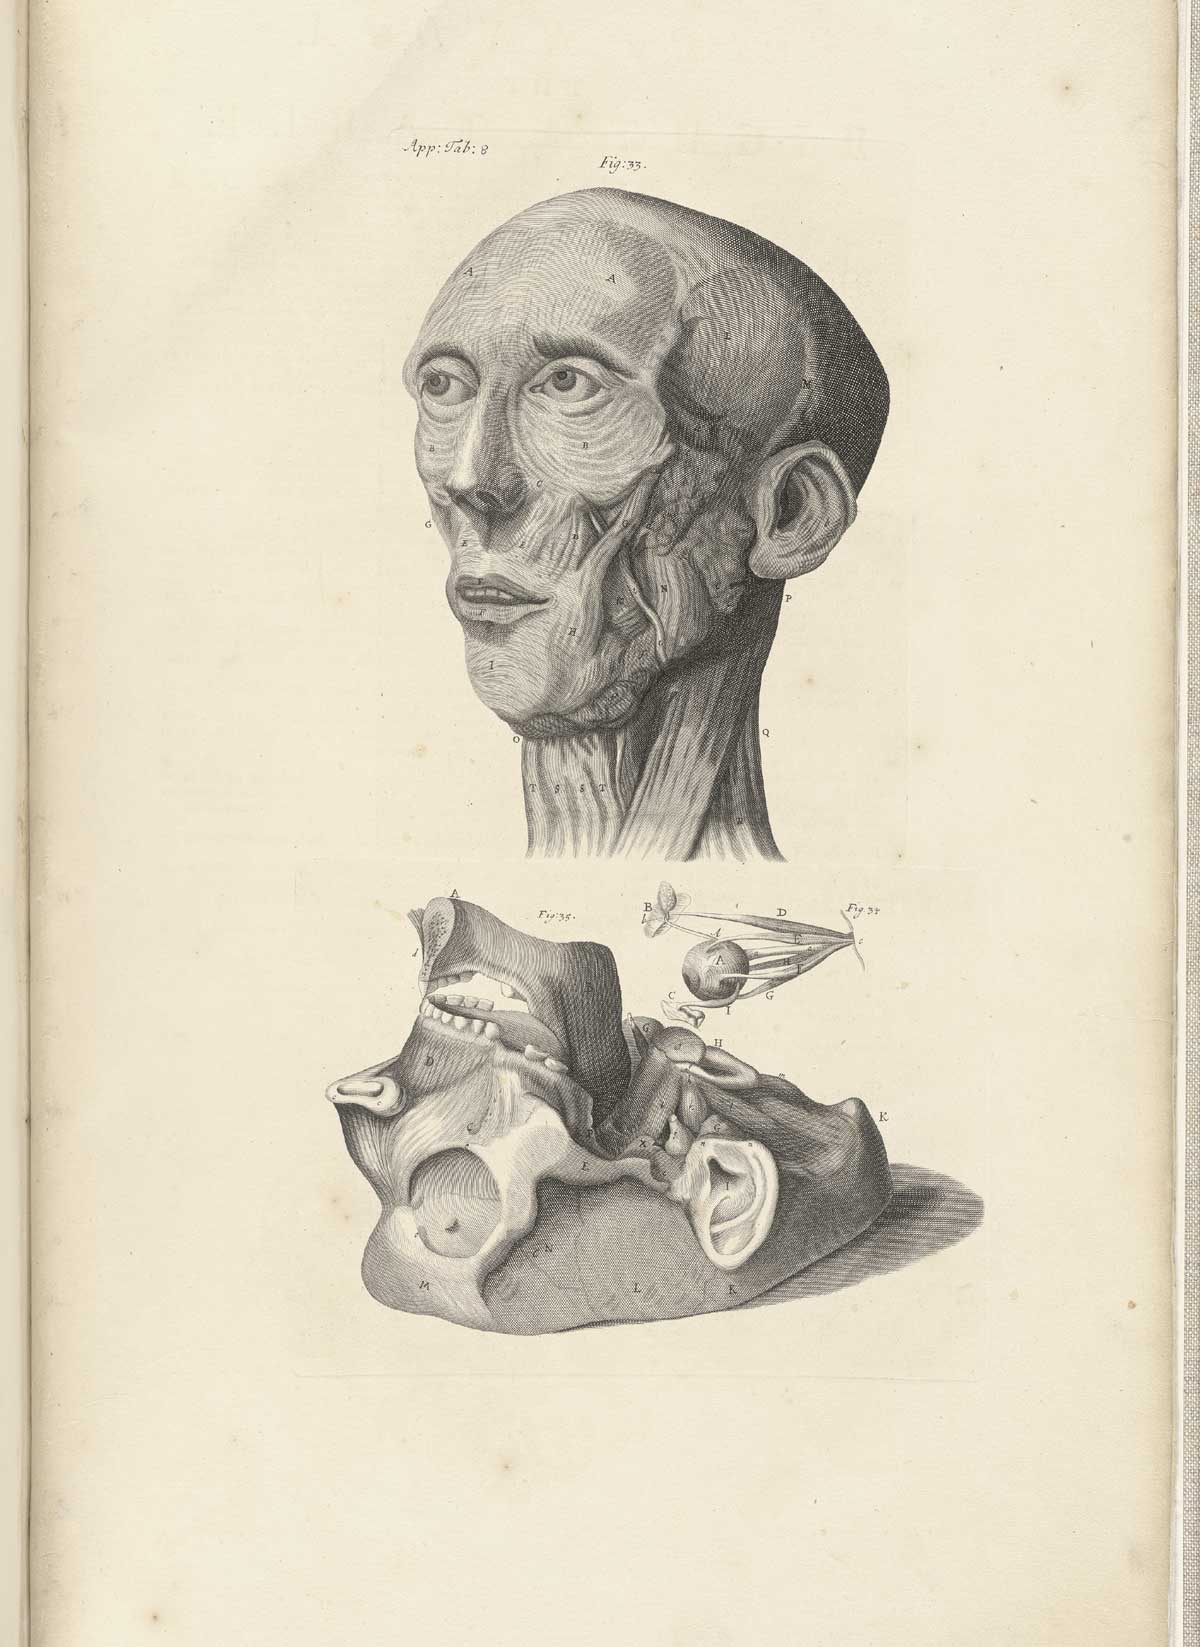 Engraving of three views of the muscles of the face; the top half of the image is of a face with the skin and flesh removed to show the face of a man looking just to the left; at bottom are the muscles of the bottom half of the skull shown with its base uppermost, showing the bones and muscles of the jaw and the first vertebra as it attaches to the base of the skull; in the middle is a figure of the eyeball with its muscles and optic nerve extending from the sides and back of the organ; from William Cowper’s Anatomy of the humane bodies, NLM Call no.: WZ 250 C876a 1698.